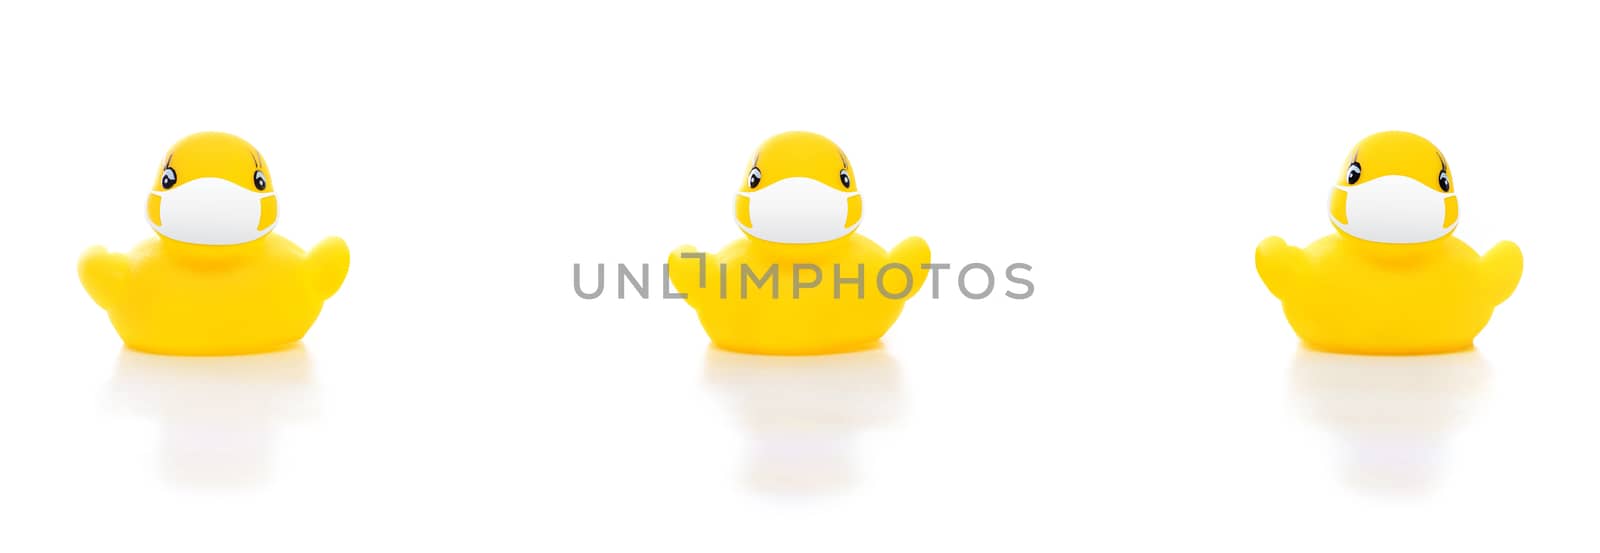 cute yellow rubber ducks in face masks on white background, concept of social distancing flu prevention, people should practice social distancing during situation of COVID-19 to stop the pandemic